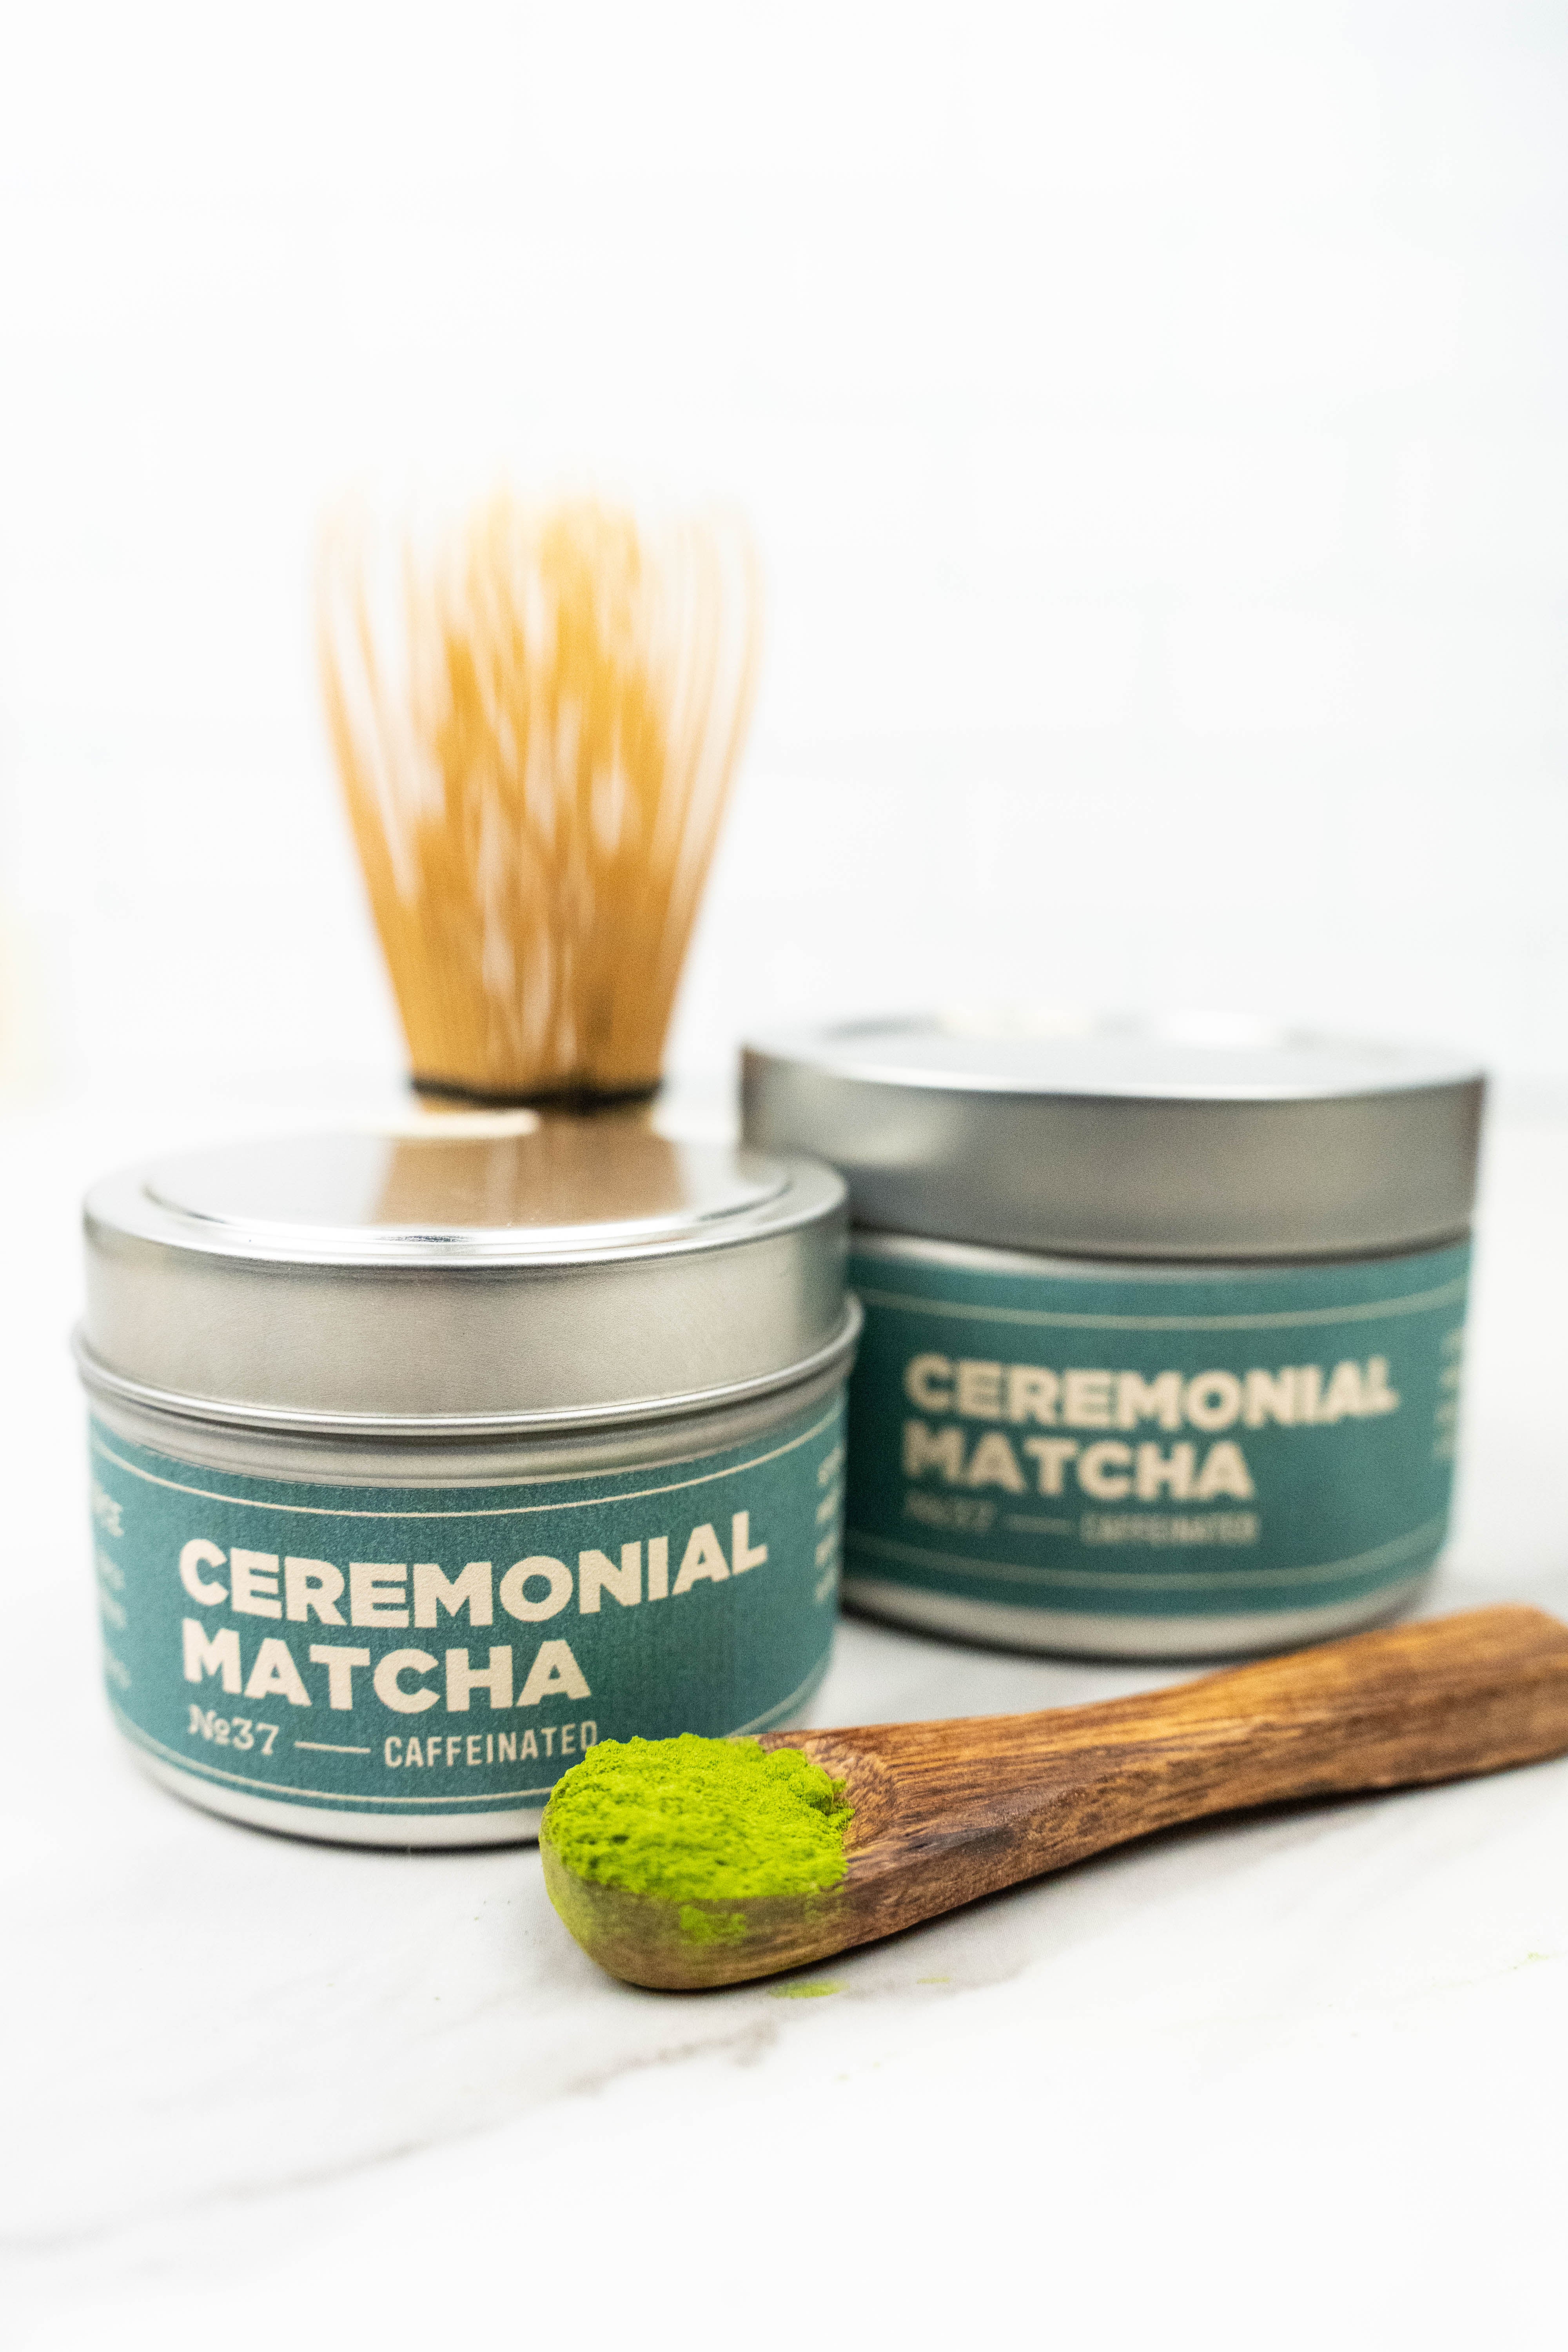 37 - Ceremonial Matcha - New packaging!